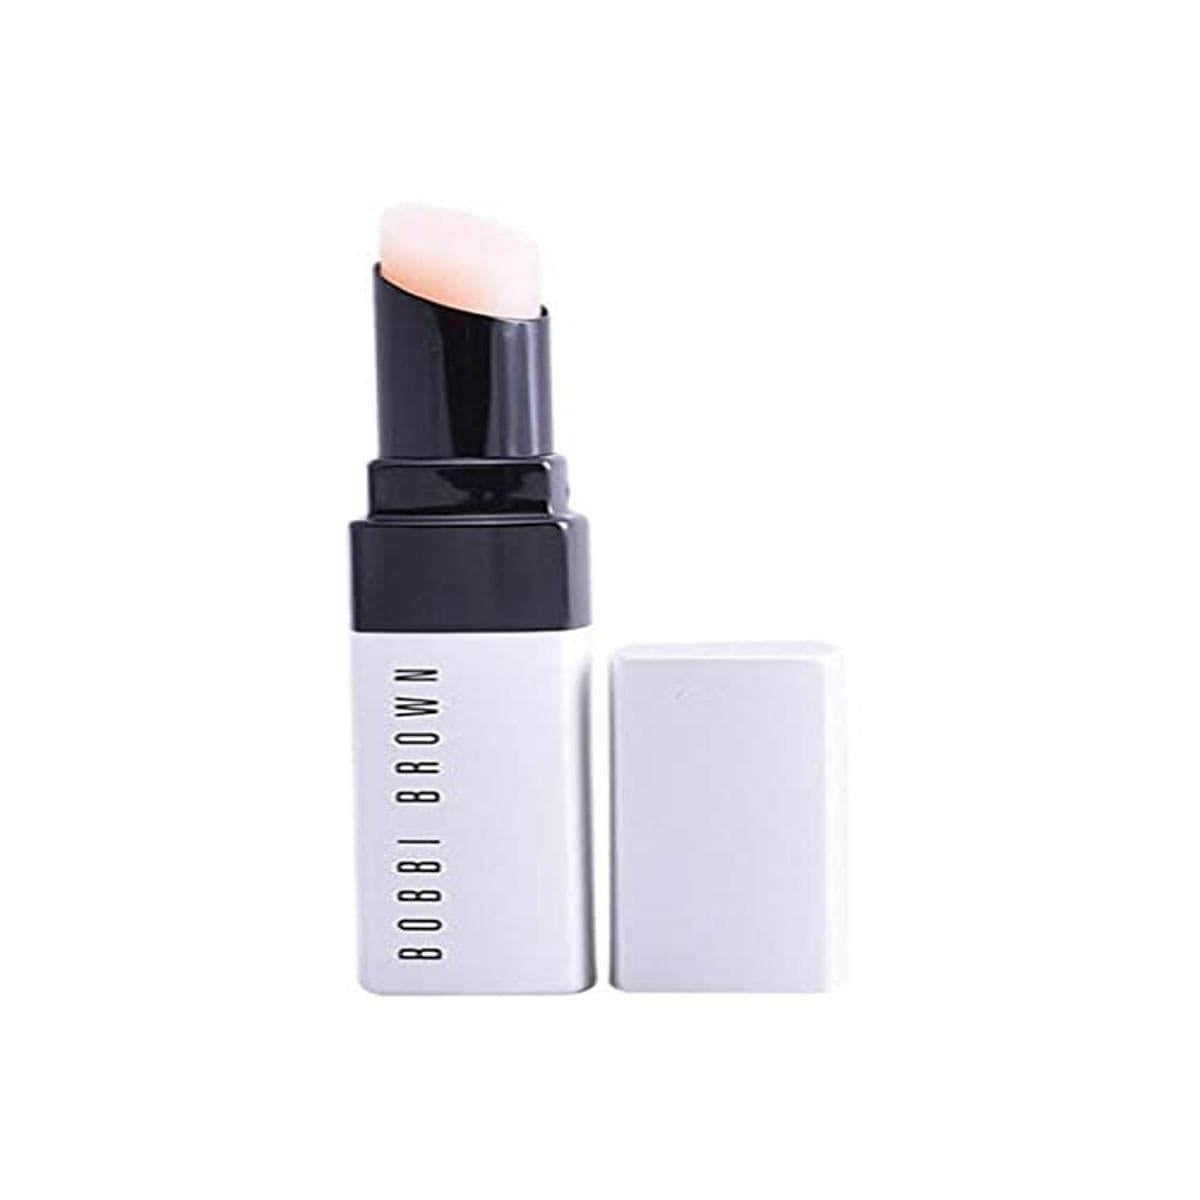 Extra Lip Tint by Bobbi Brown Bare Pink 2.3g